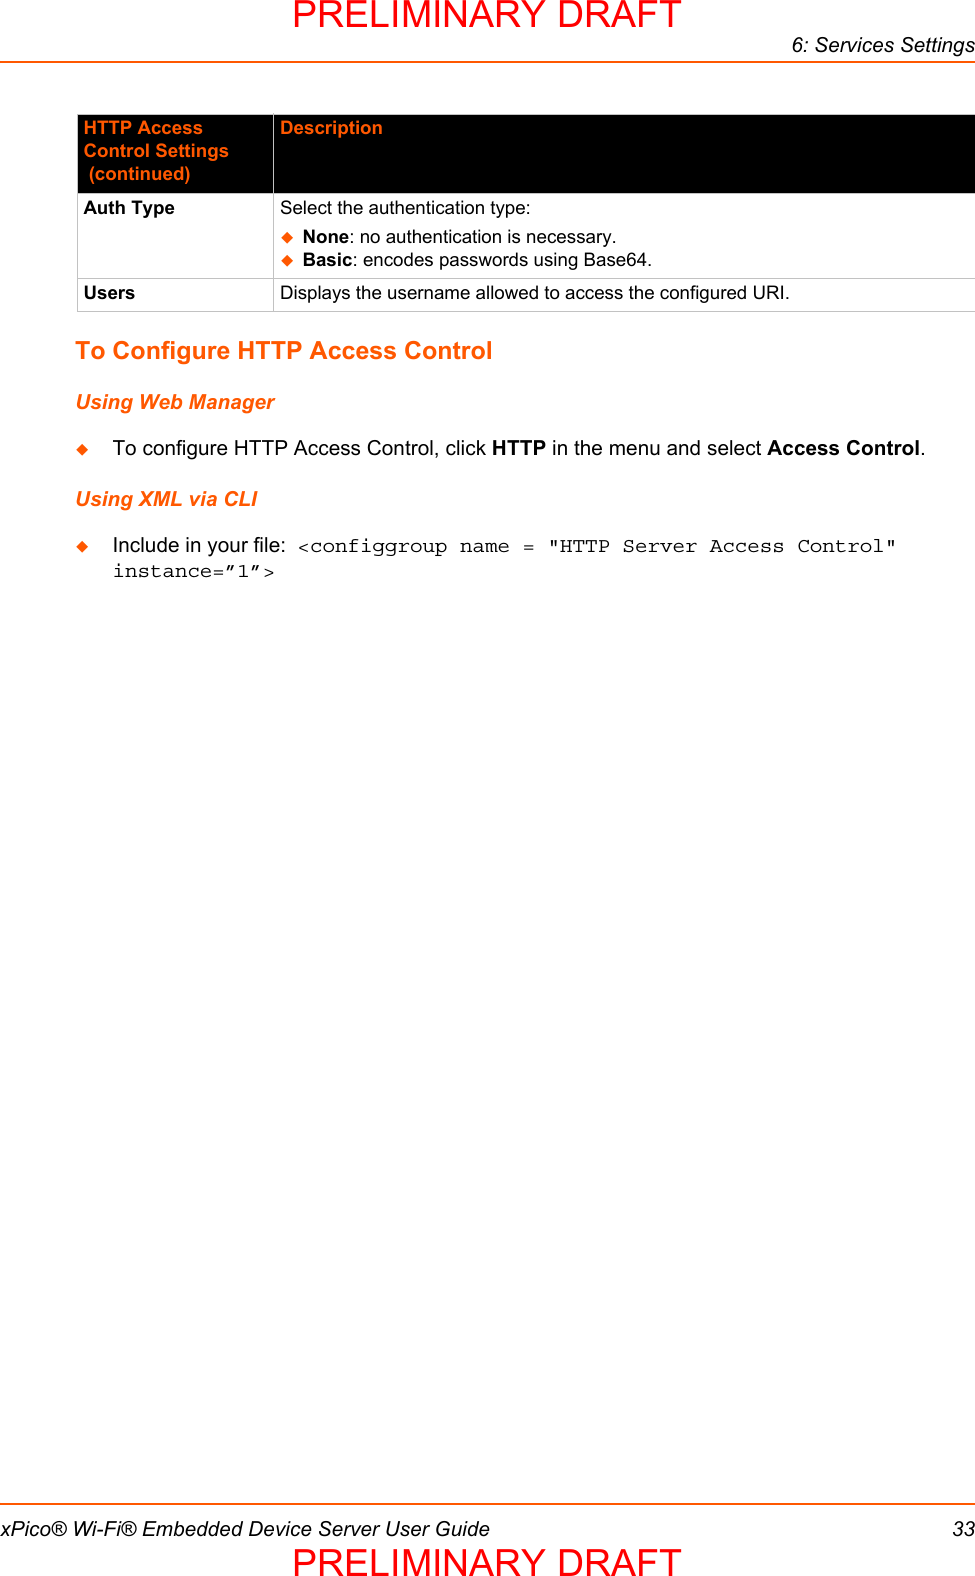 6: Services SettingsxPico® Wi-Fi® Embedded Device Server User Guide 33To Configure HTTP Access ControlUsing Web ManagerTo configure HTTP Access Control, click HTTP in the menu and select Access Control.Using XML via CLIInclude in your file:  &lt;configgroup name = &quot;HTTP Server Access Control&quot; instance=”1”&gt;Auth Type Select the authentication type: None: no authentication is necessary. Basic: encodes passwords using Base64. Users Displays the username allowed to access the configured URI.HTTP Access Control Settings (continued)DescriptionPRELIMINARY DRAFTPRELIMINARY DRAFT